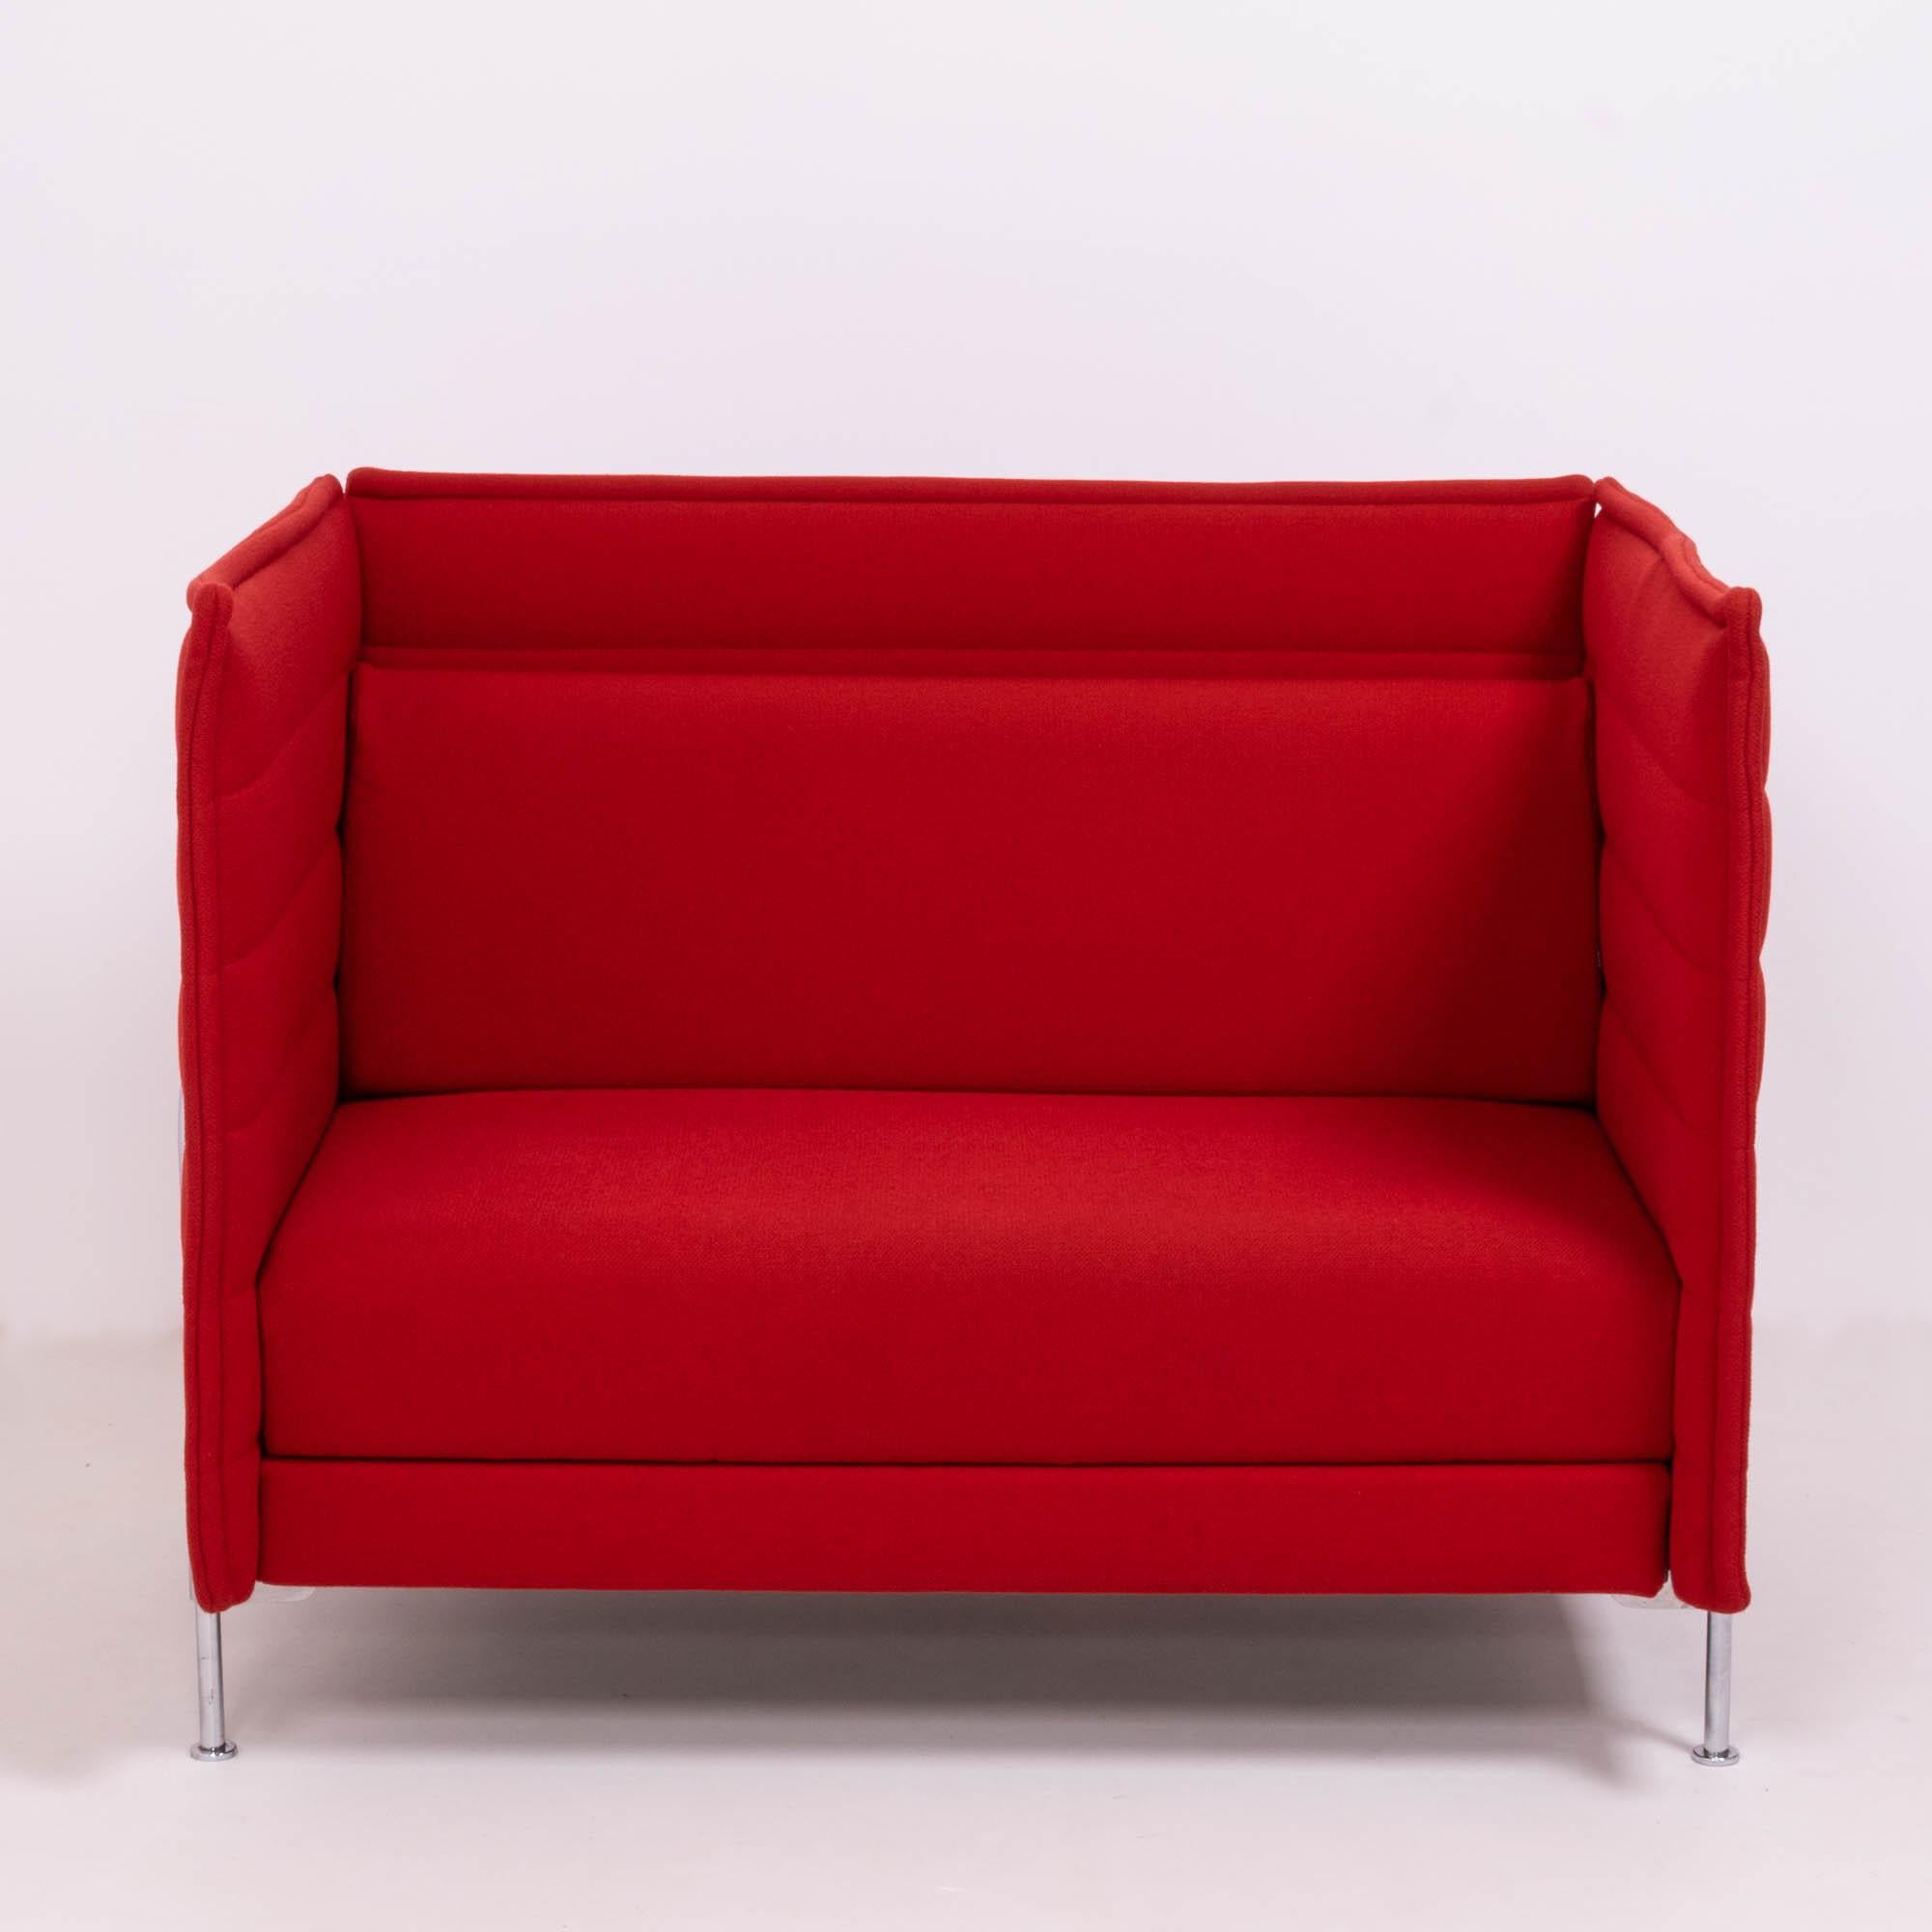 Designed by Ronan & Erwan Bouroullec in 2006, the Vitra Alcove loveseat sofa is an architectural piece of furniture, allowing for small spaces to be created.

Constructed with a tubular steel frame, this sofa is upholstered in vibrant red fabric,